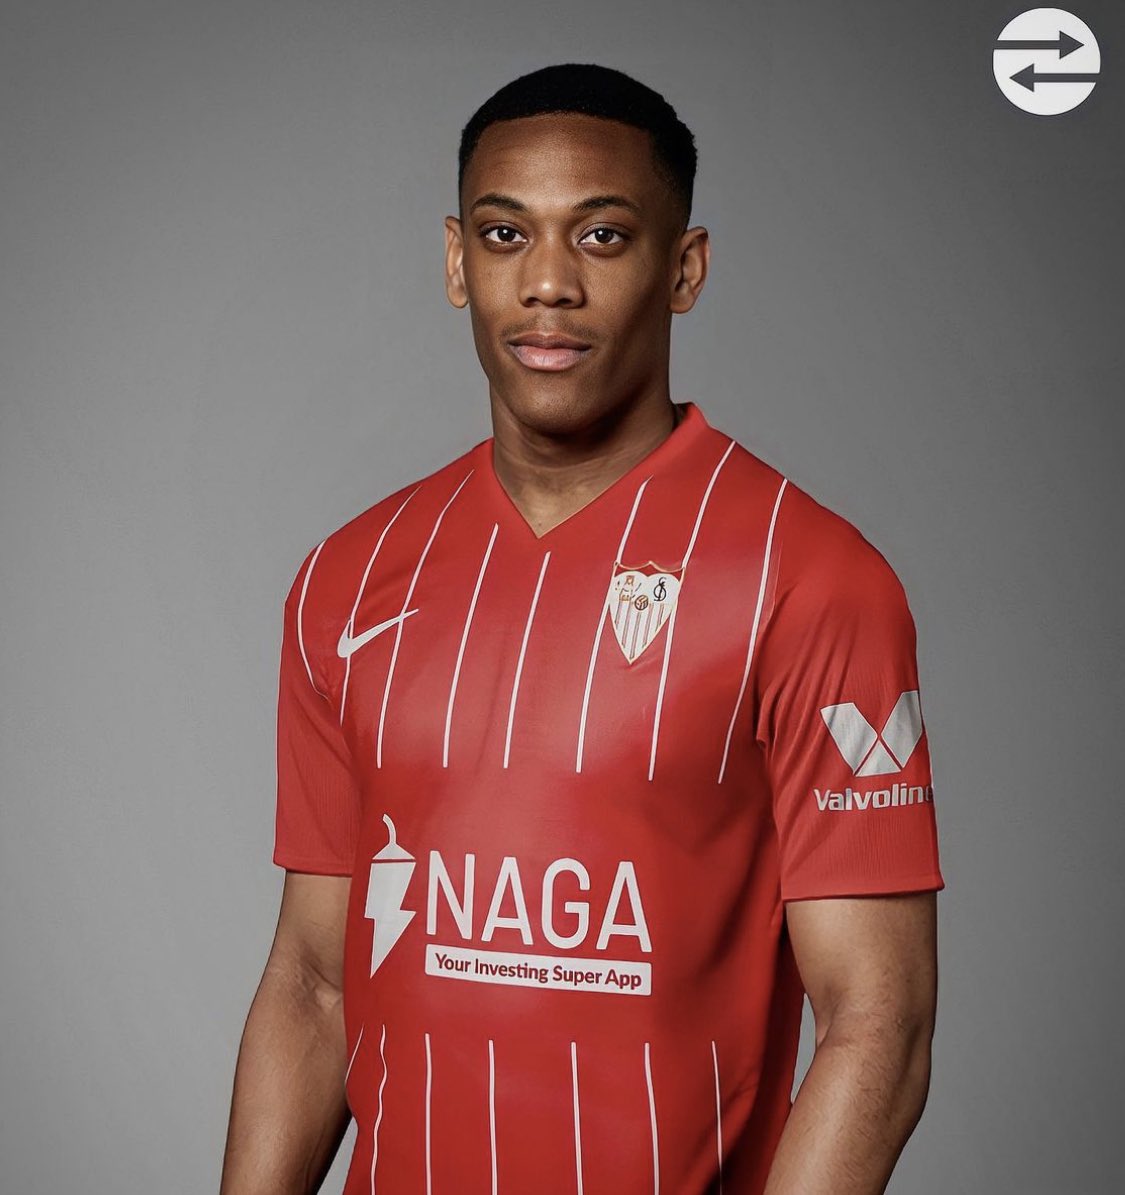 Sevilla signs Anthony Martial on loan from Manchester United – All Soccer